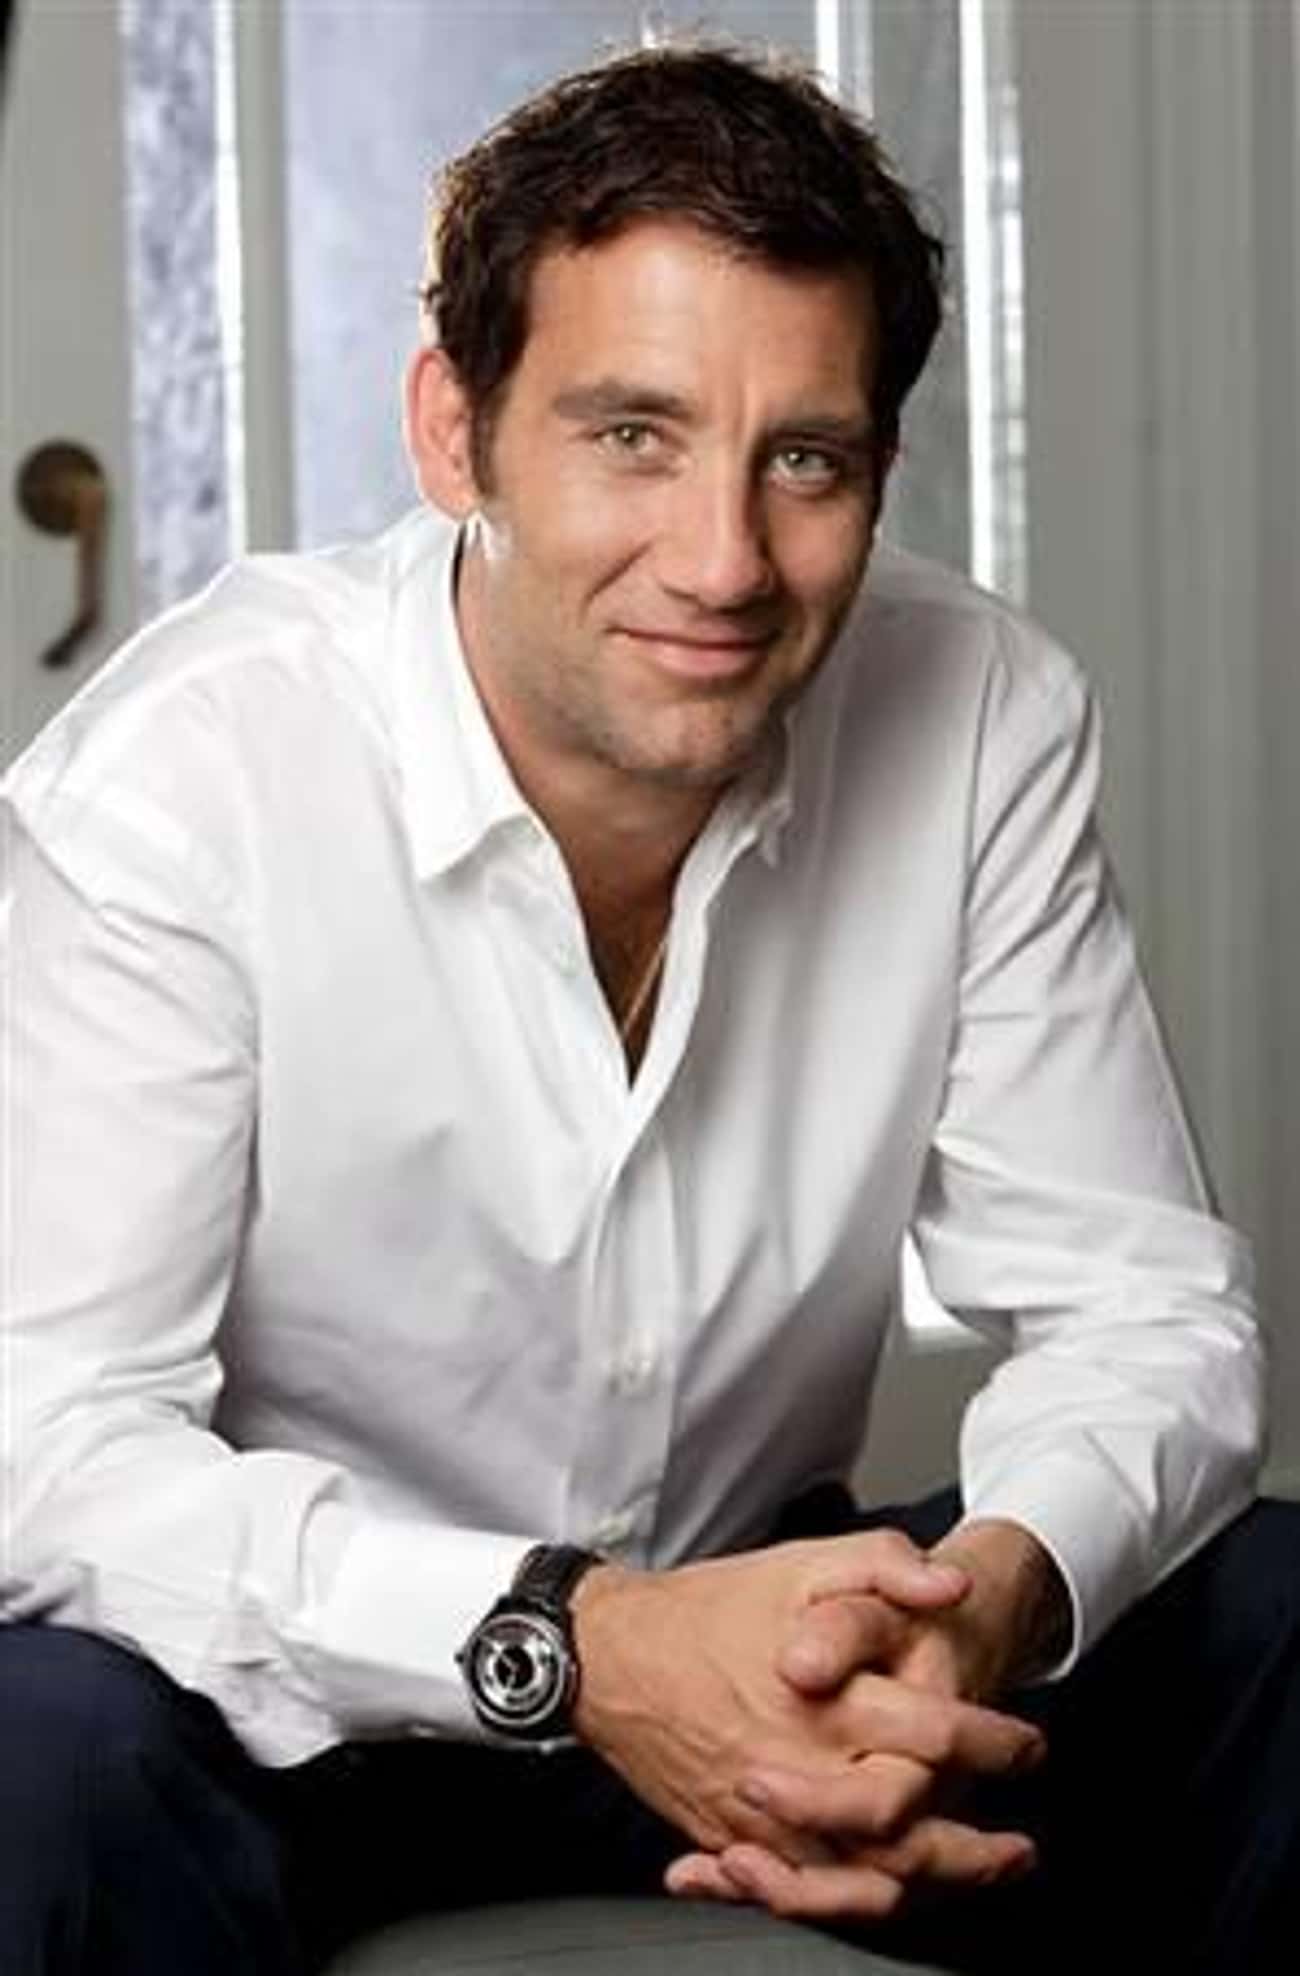 Clive Owen in White Long Sleeved Top